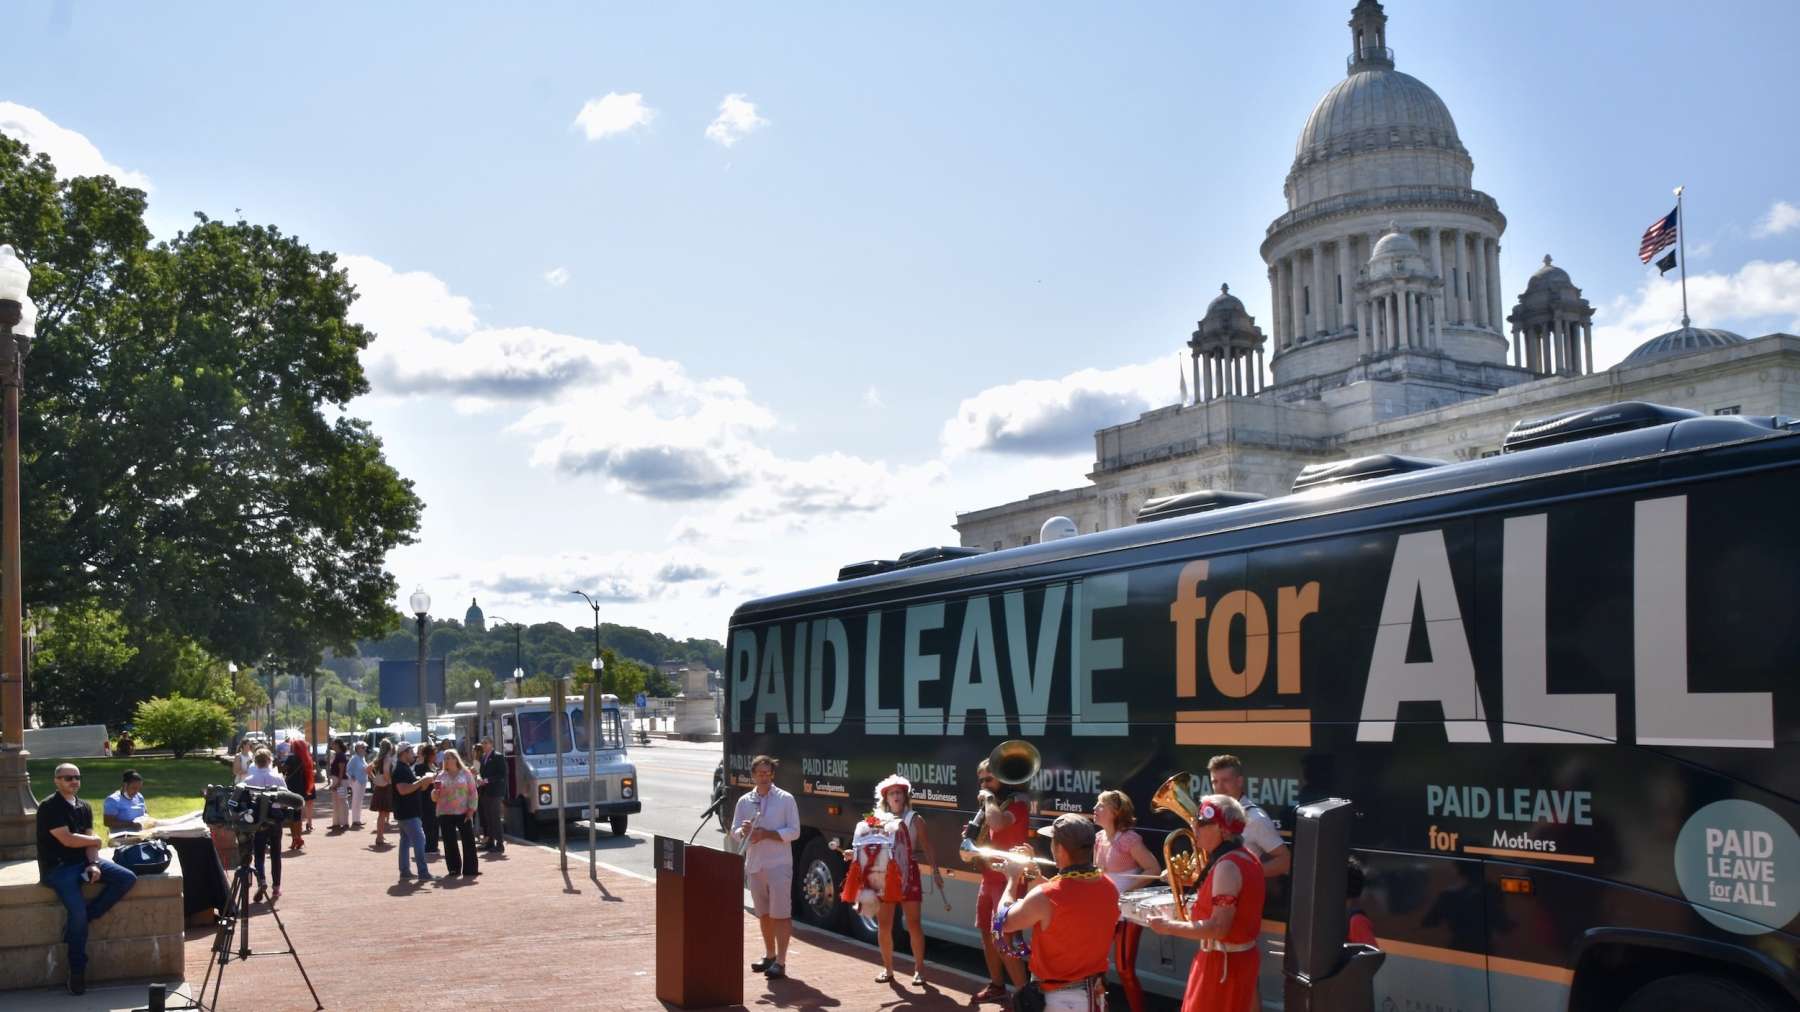 Rhode Island News: Paid Leave for All National Bus Tour kicks off from Rhode Island